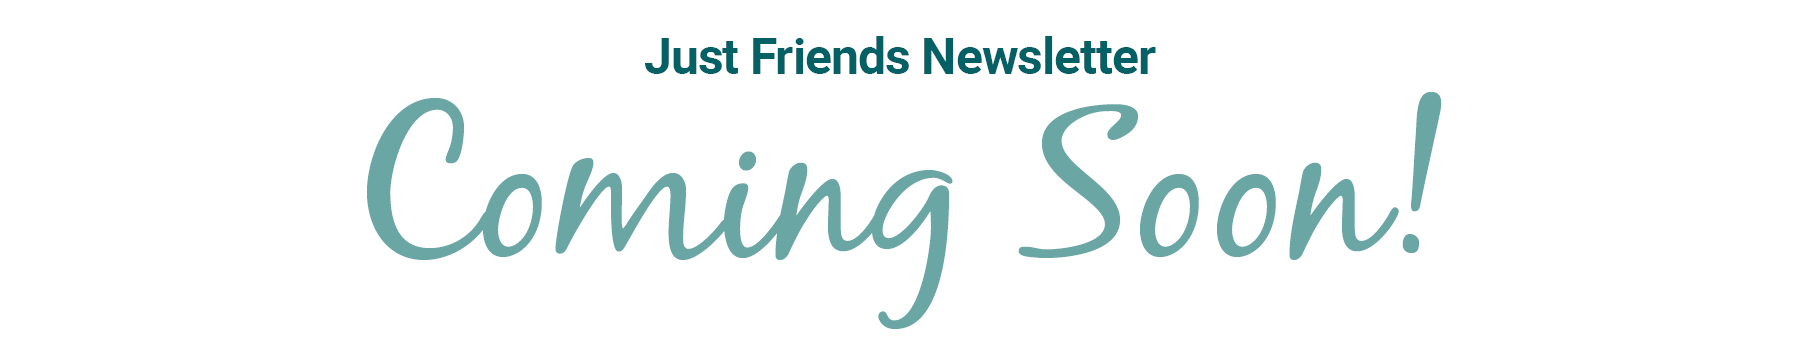 just-friends-newsletter-coming-soon-text